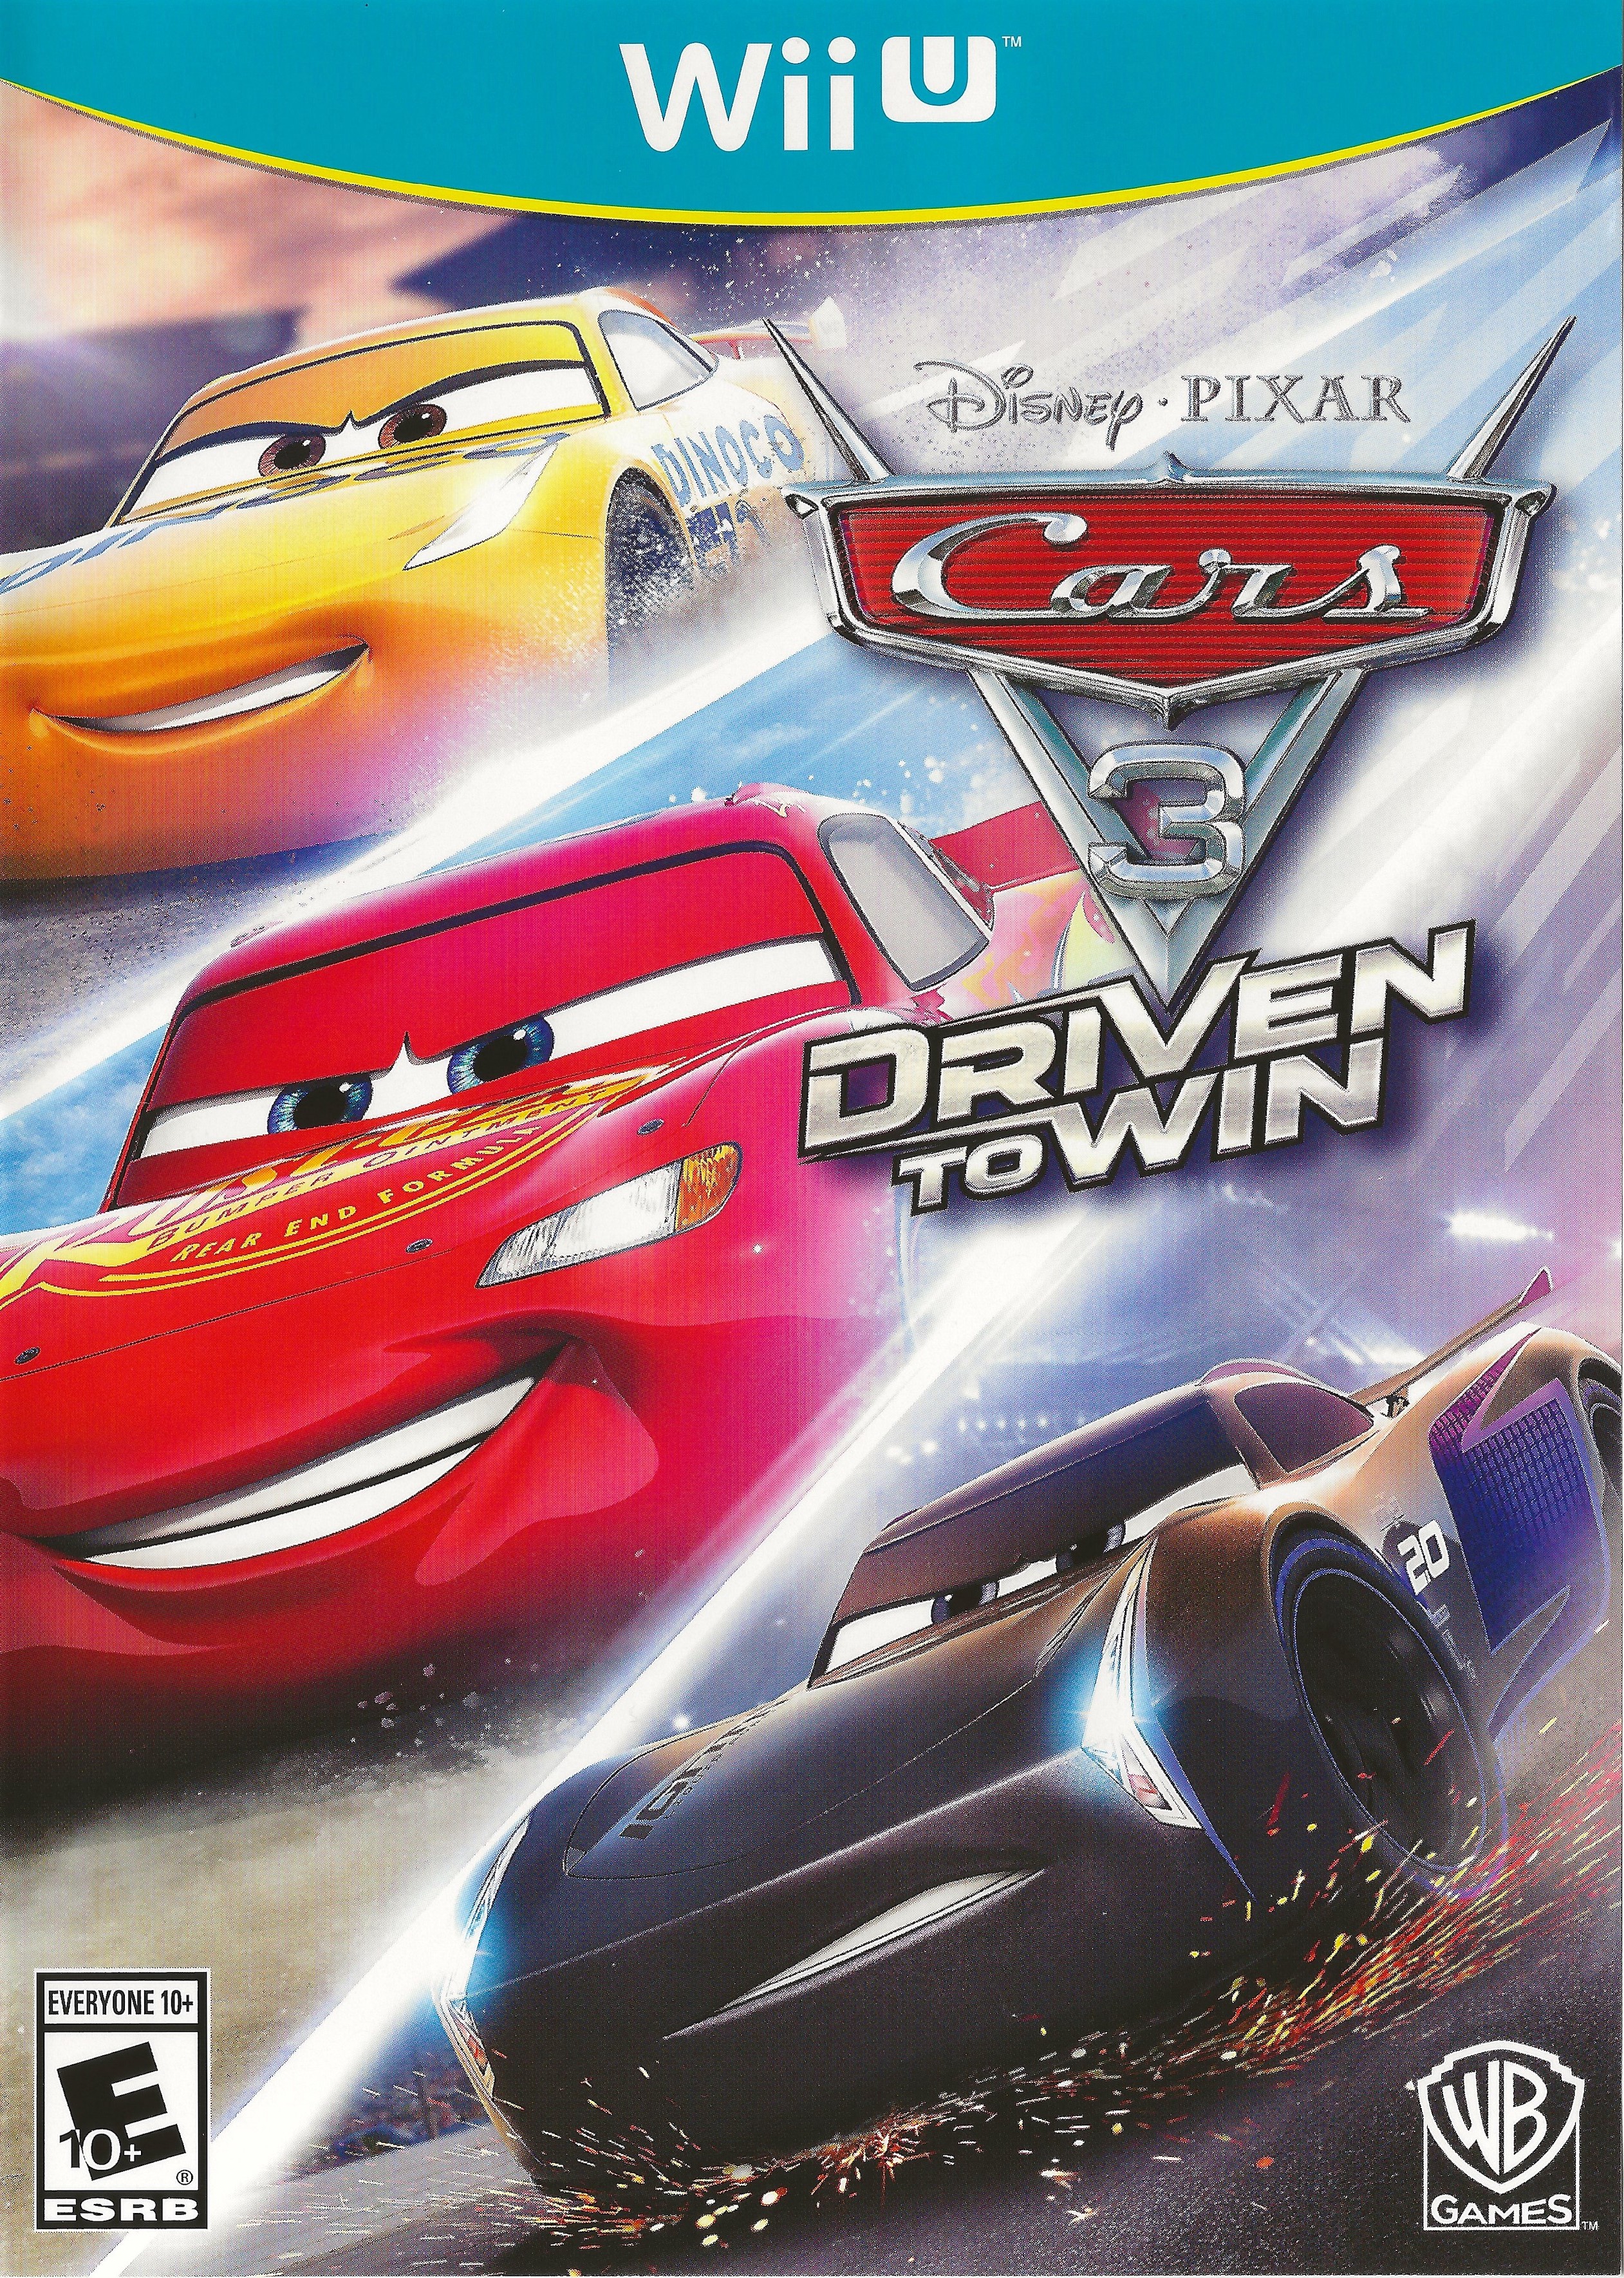 'Cars 3: Driven to Win'